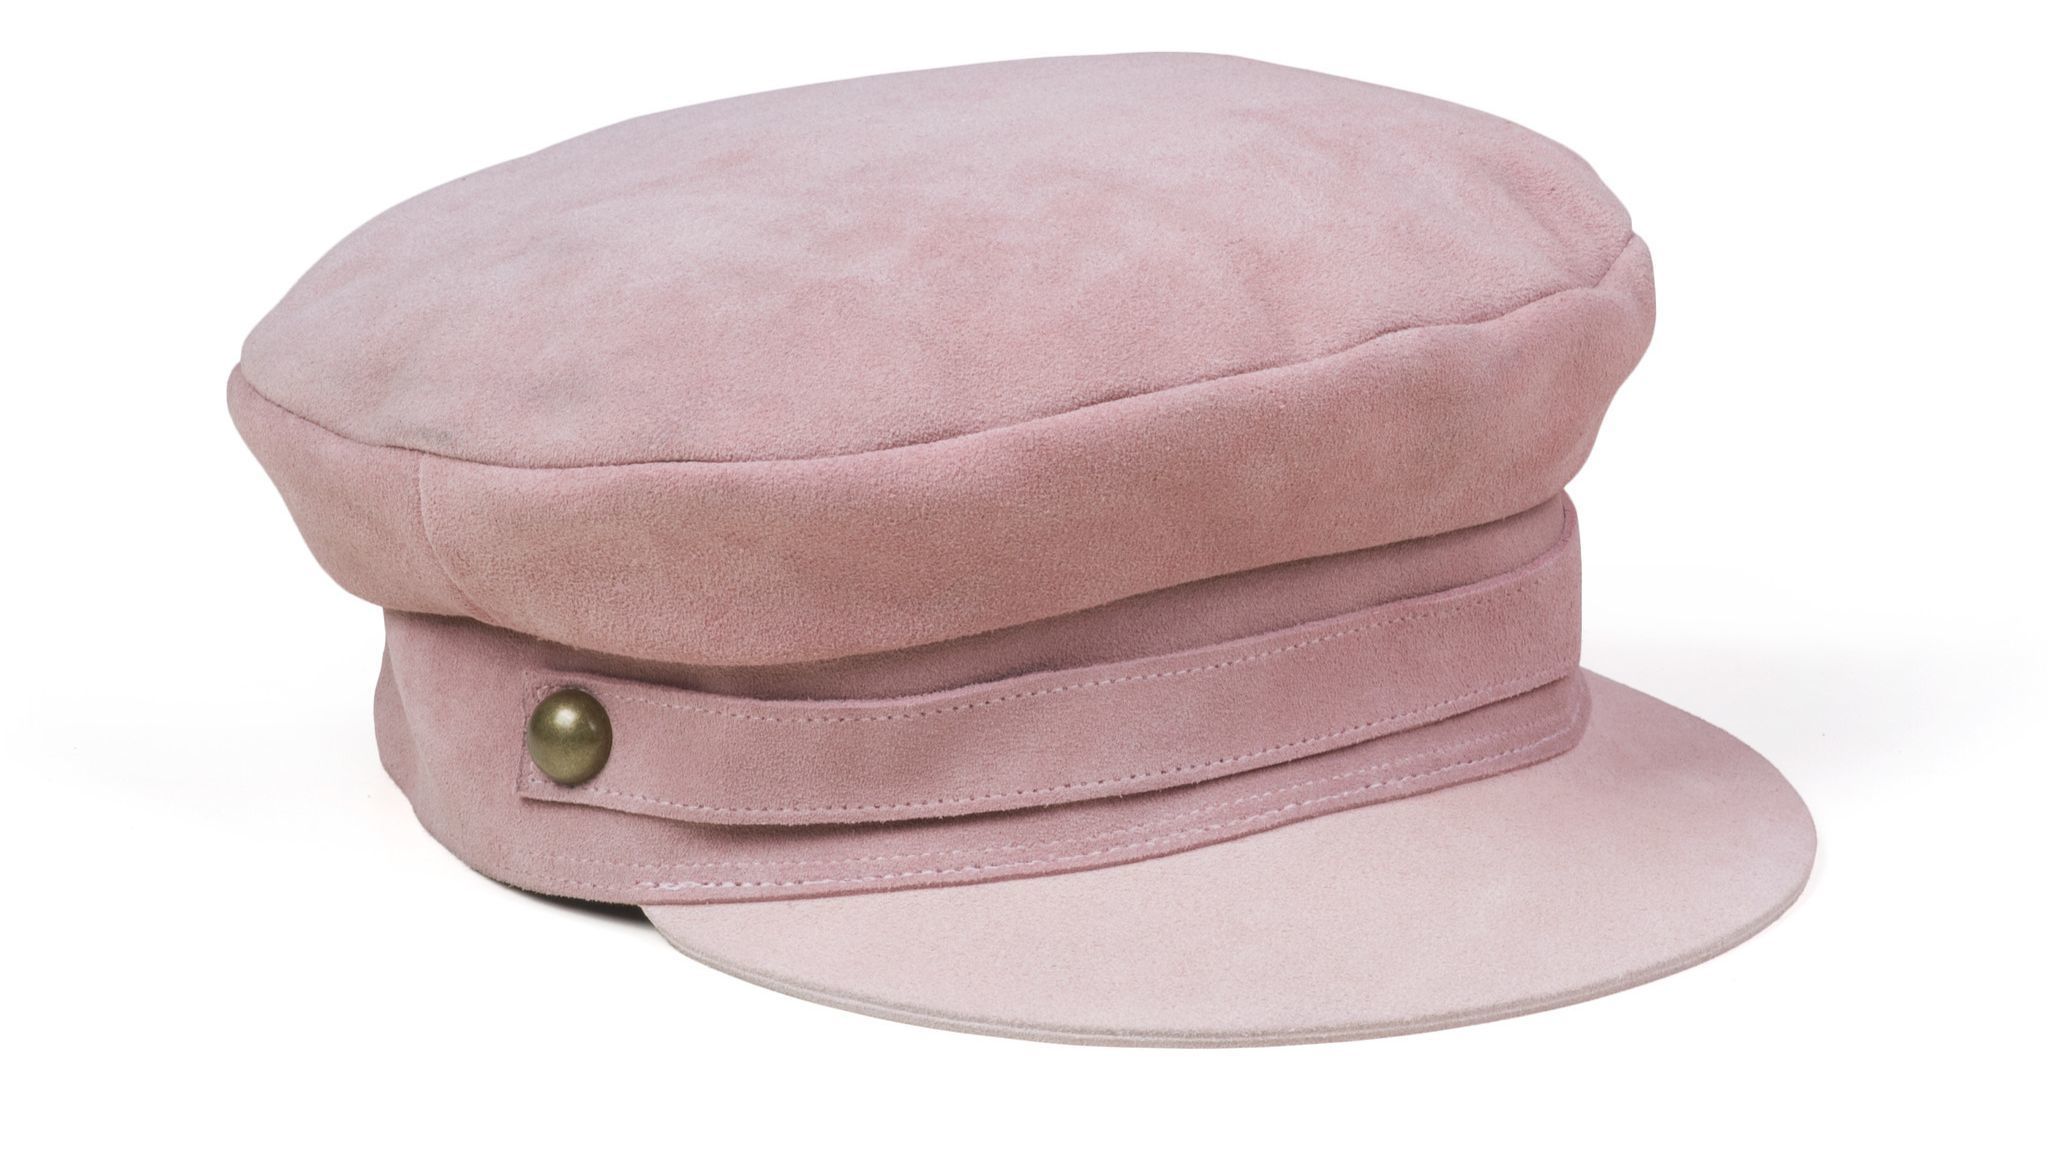 A pink suede slouch cap